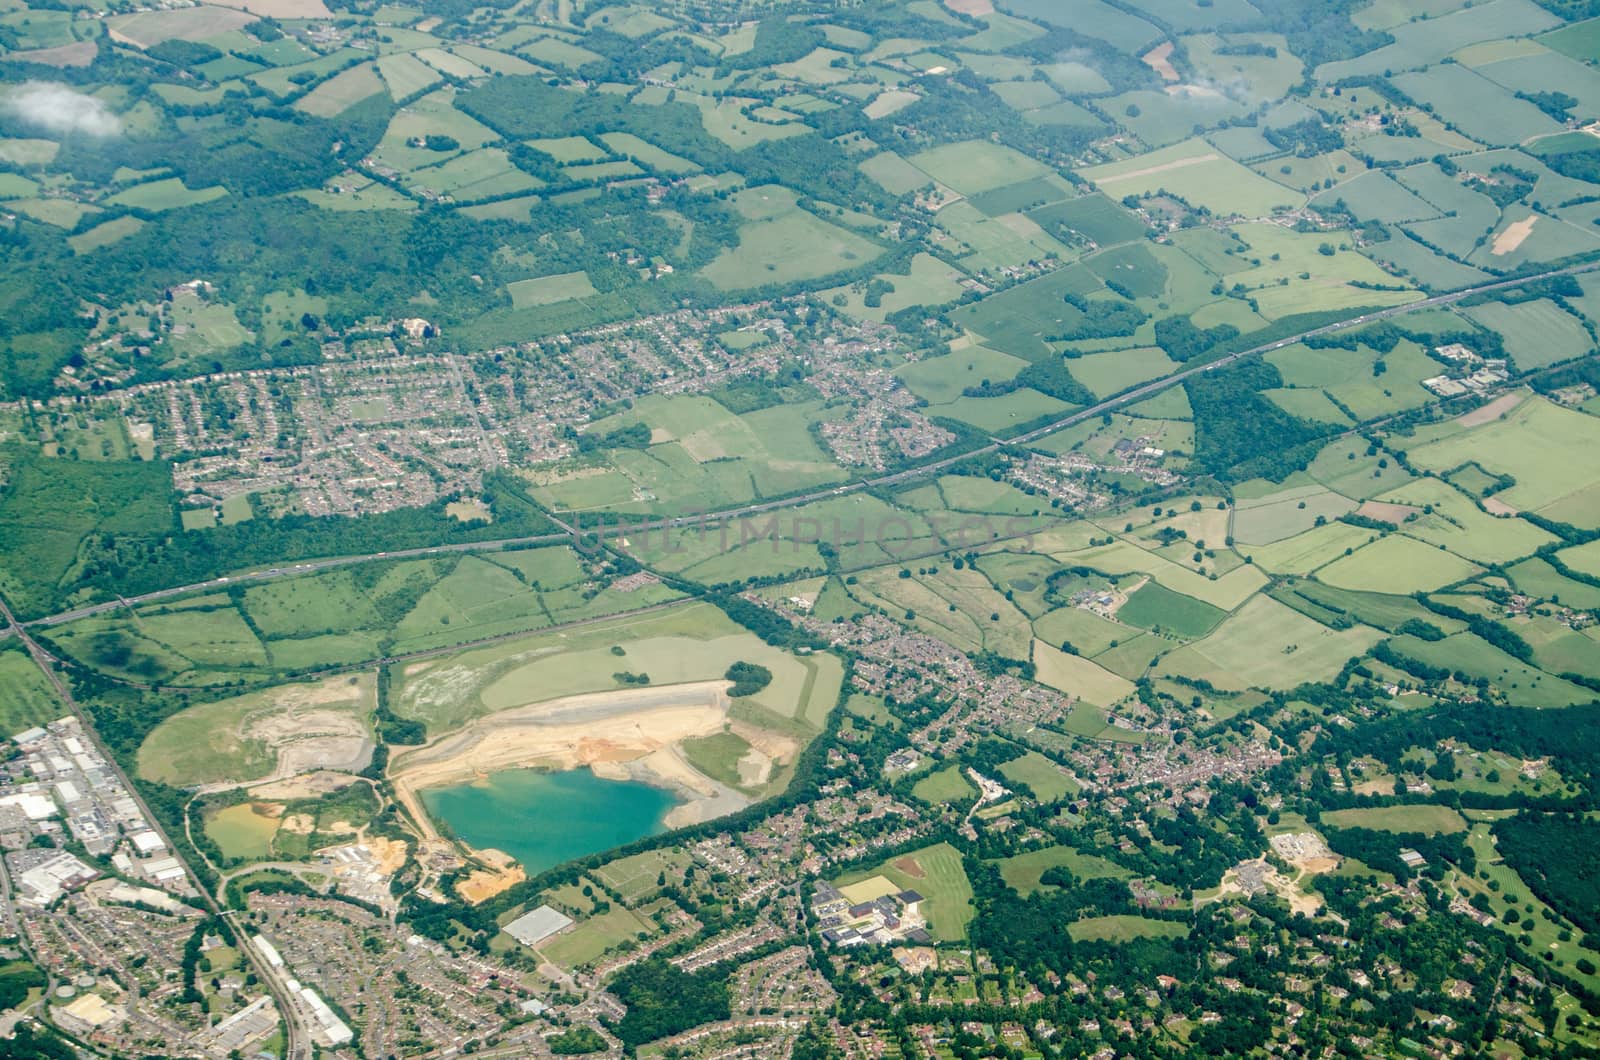 Aerial view of Sevenoaks in Kent with the Tarmac  quarry towards the left hand side.  The quarry provides sand for mortar in construction.  The M26 motorway runs across the middle of the image with the village of Kemsing to the north.   